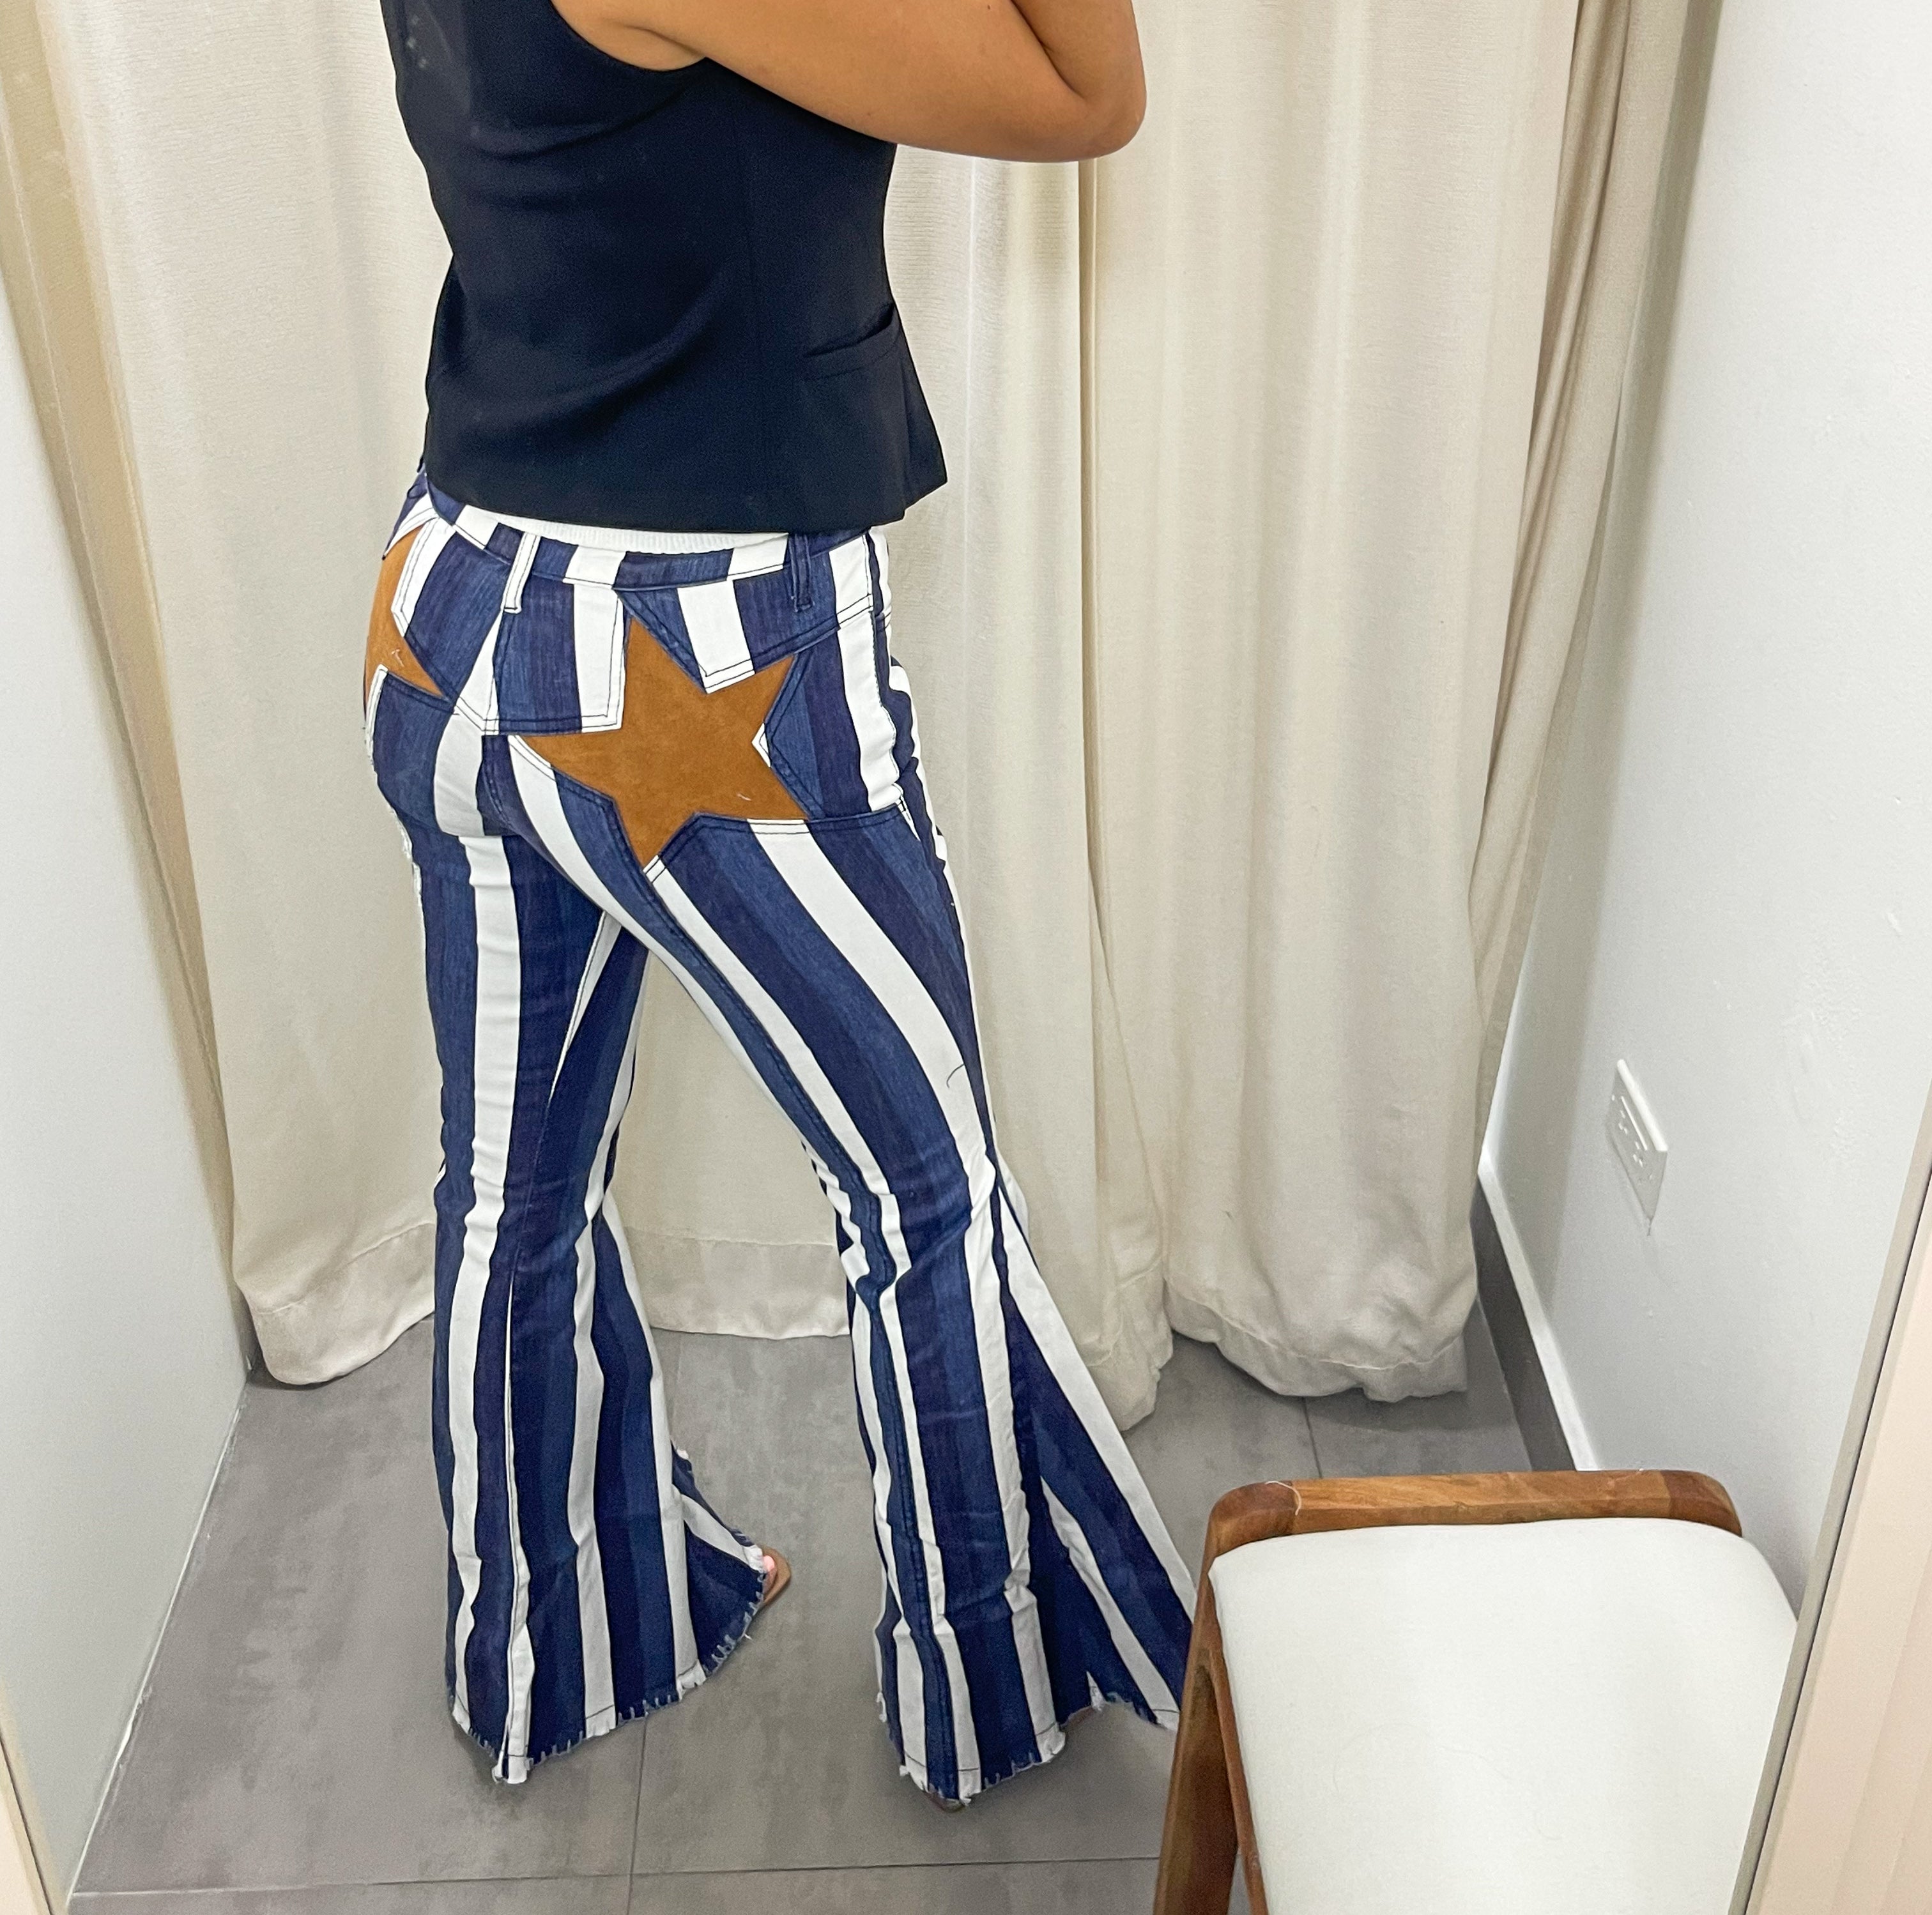 NAVY STRIPED FLARE BACK STAR JEANS